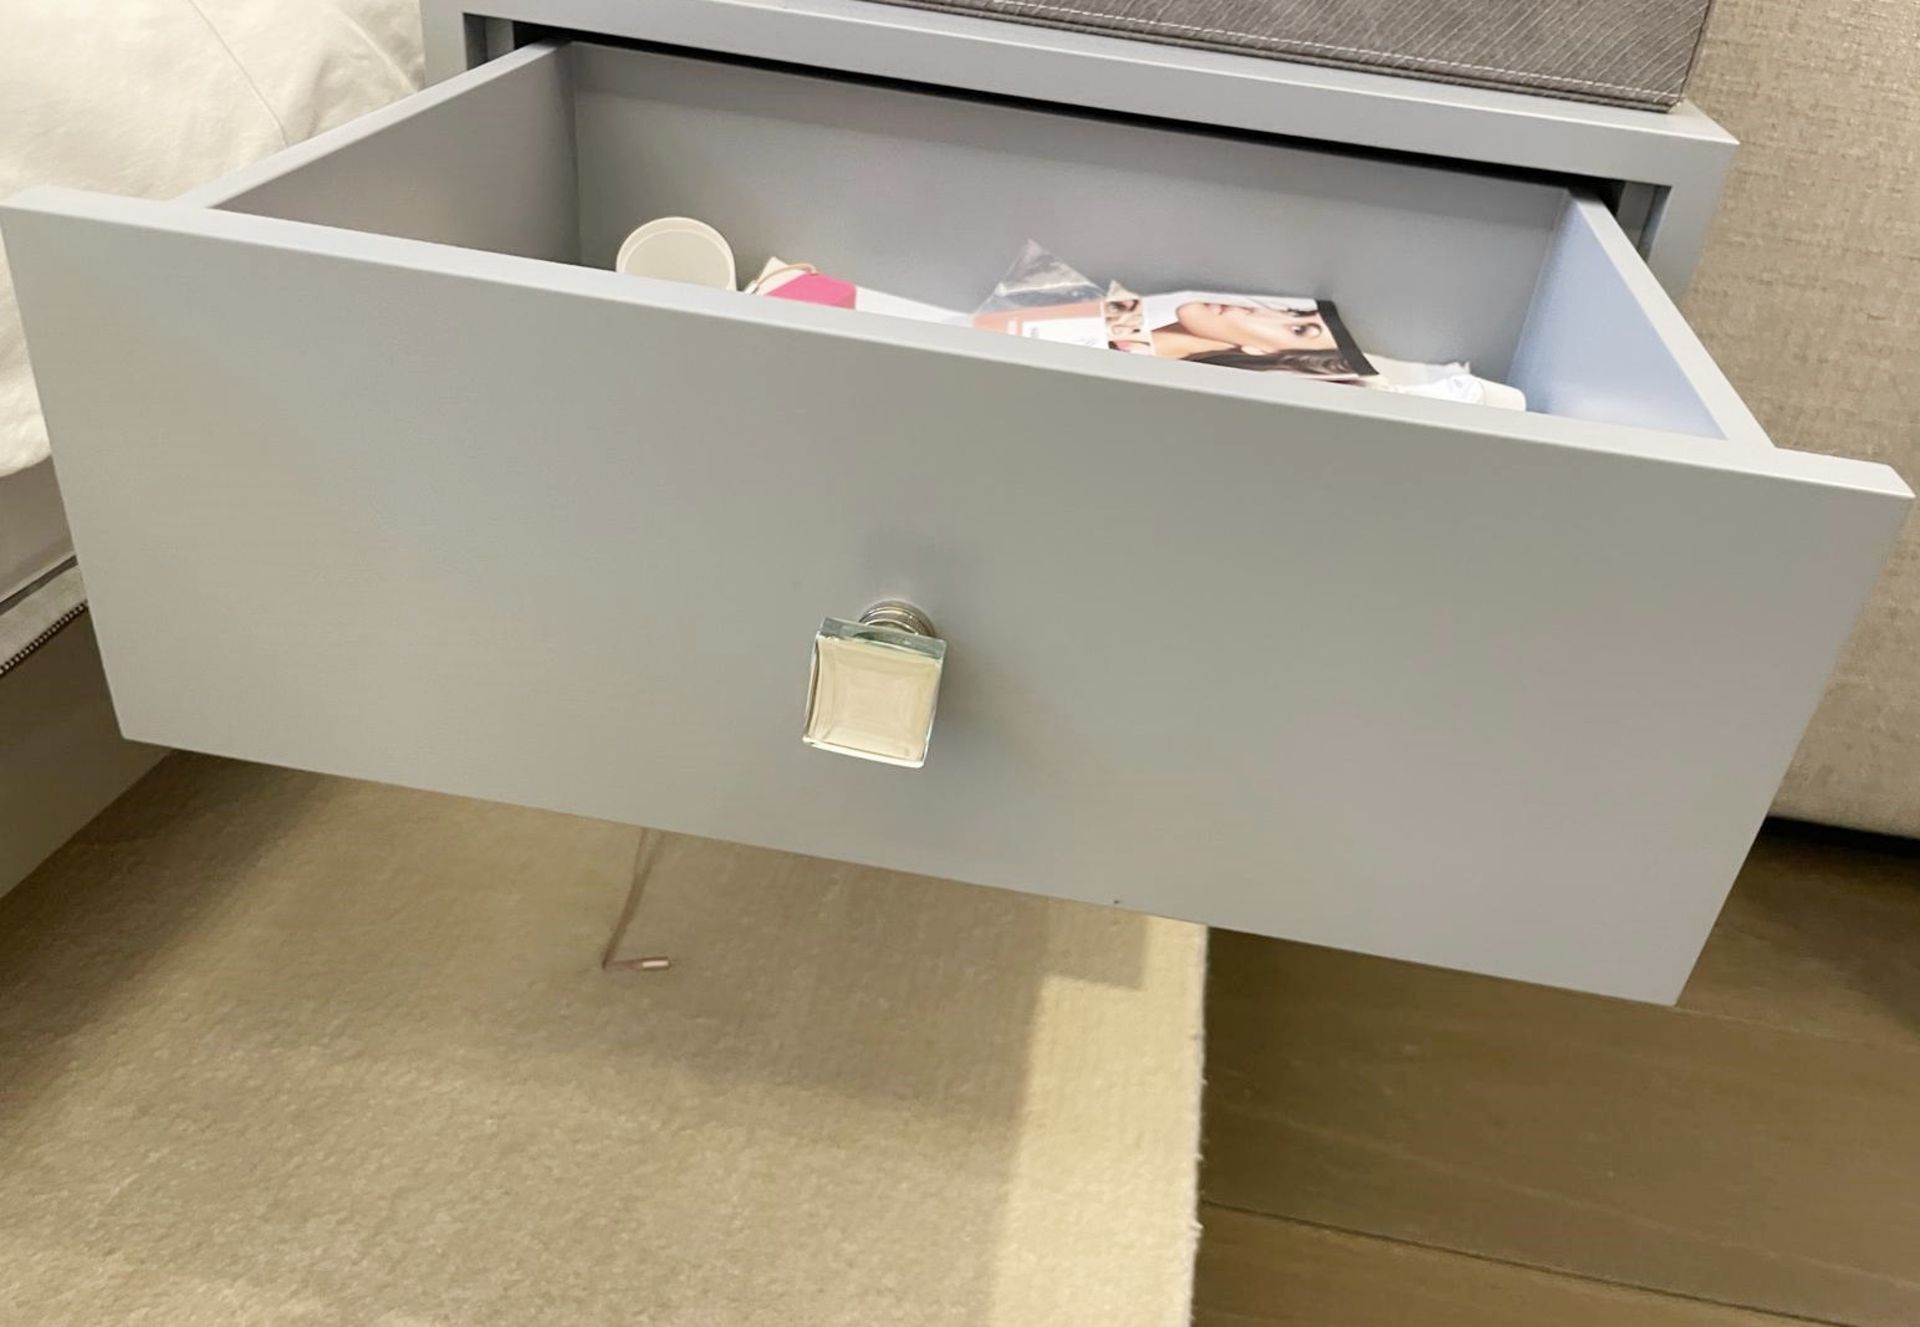 Pair of Stylish Wall Hung Bedside Drawers with a Grey Lacquer Finish and Glass Handles - Image 6 of 14